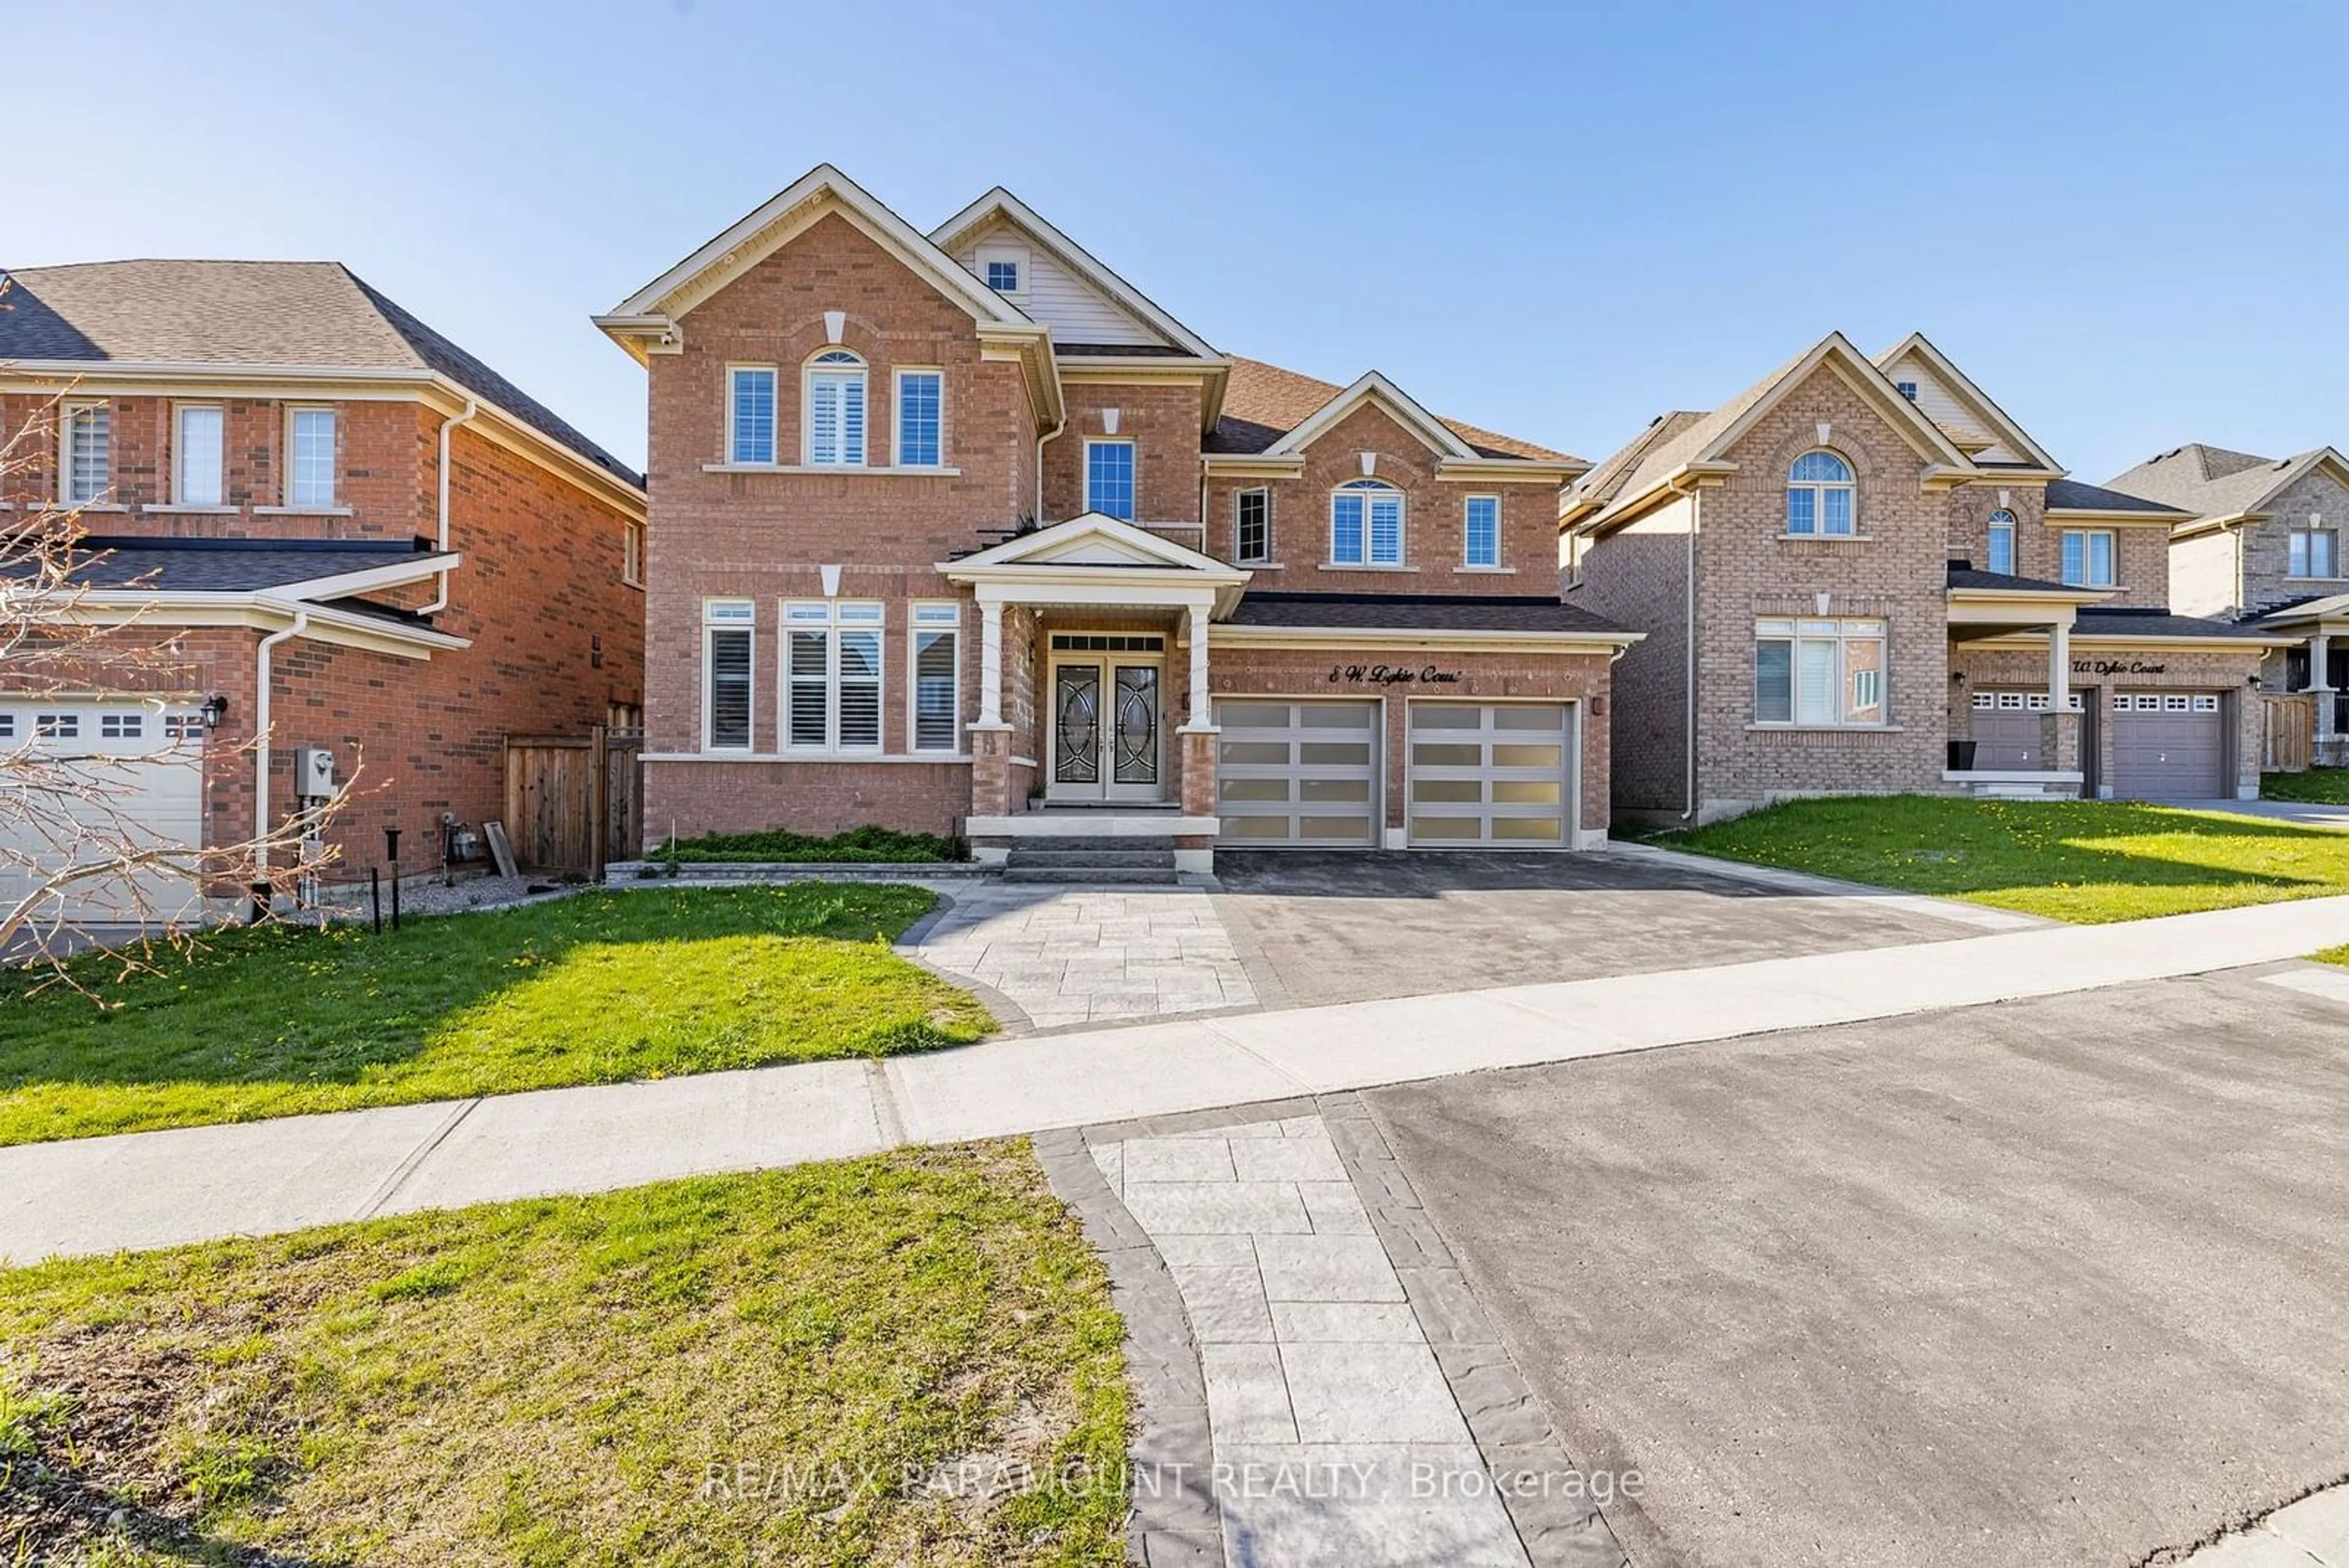 Home with brick exterior material for 8 W. Dykie Crt, Bradford West Gwillimbury Ontario L3Z 0Y1